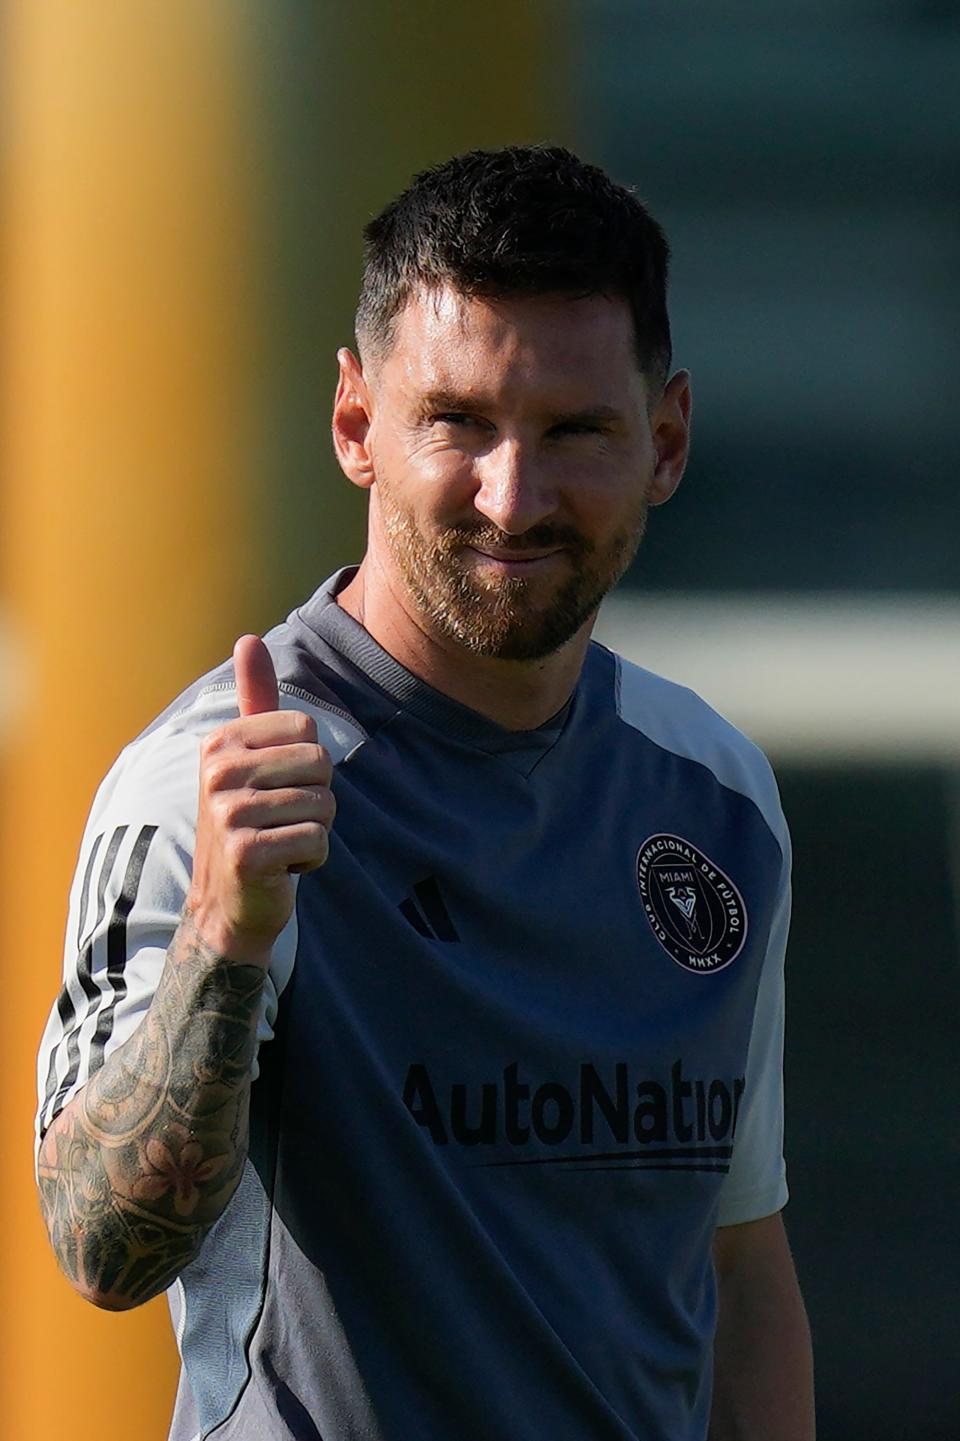 Lionel Messi gives a thumbs up toward journalists on the sideline as he participates in a training session for the Inter Miami MLS soccer team Tuesday, July 18, 2023, in Fort Lauderdale, Fla.